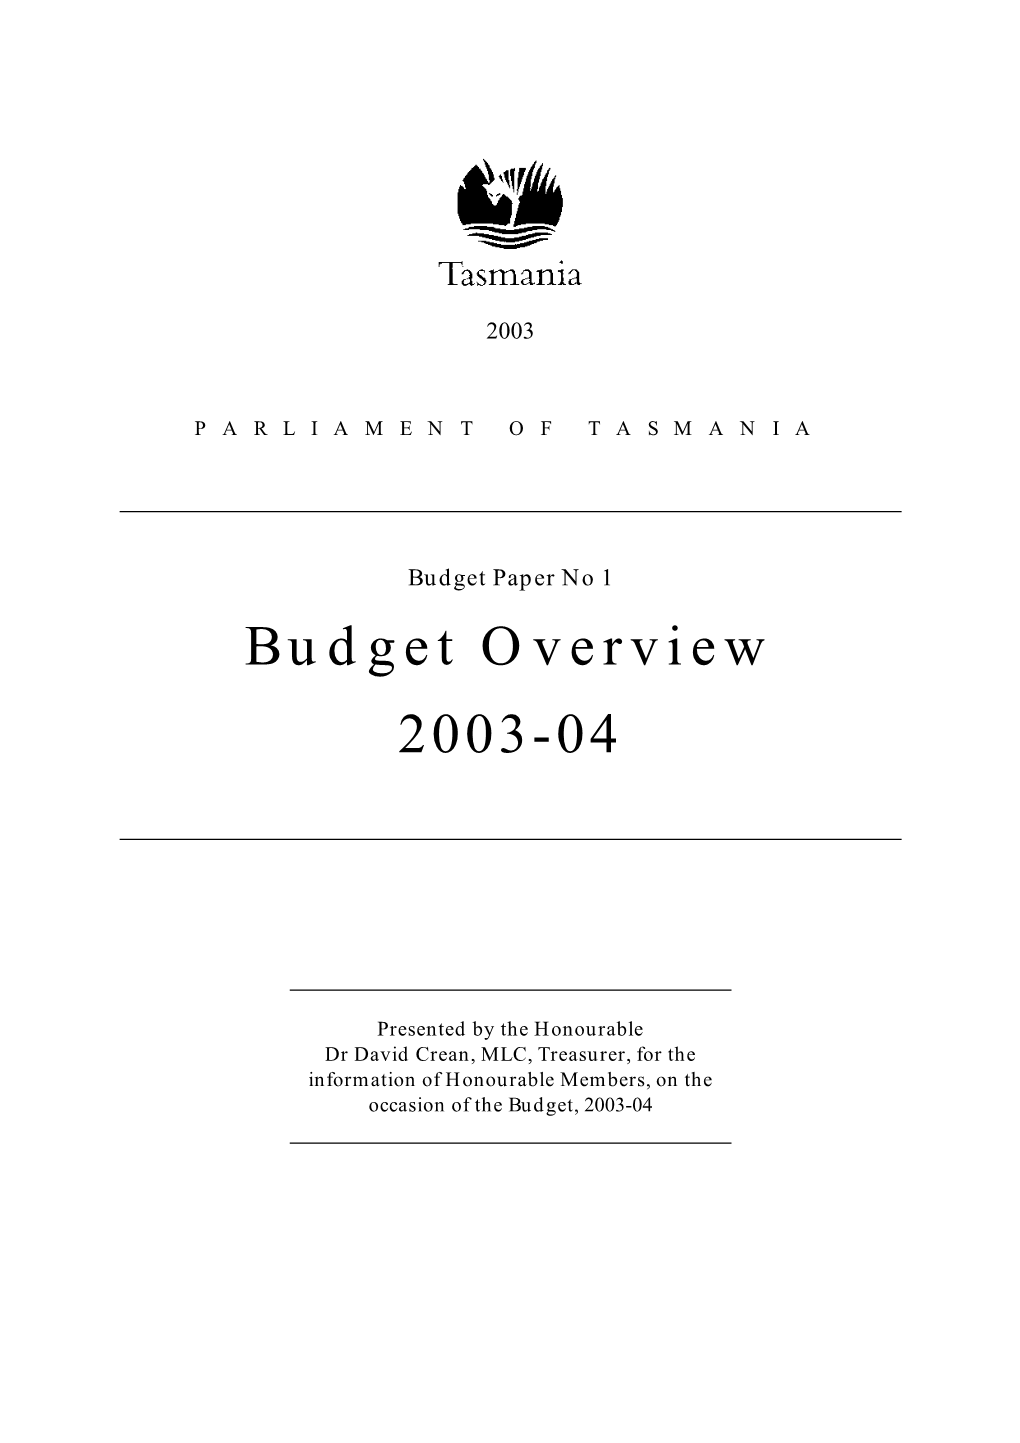 Budget Overview 2003-04